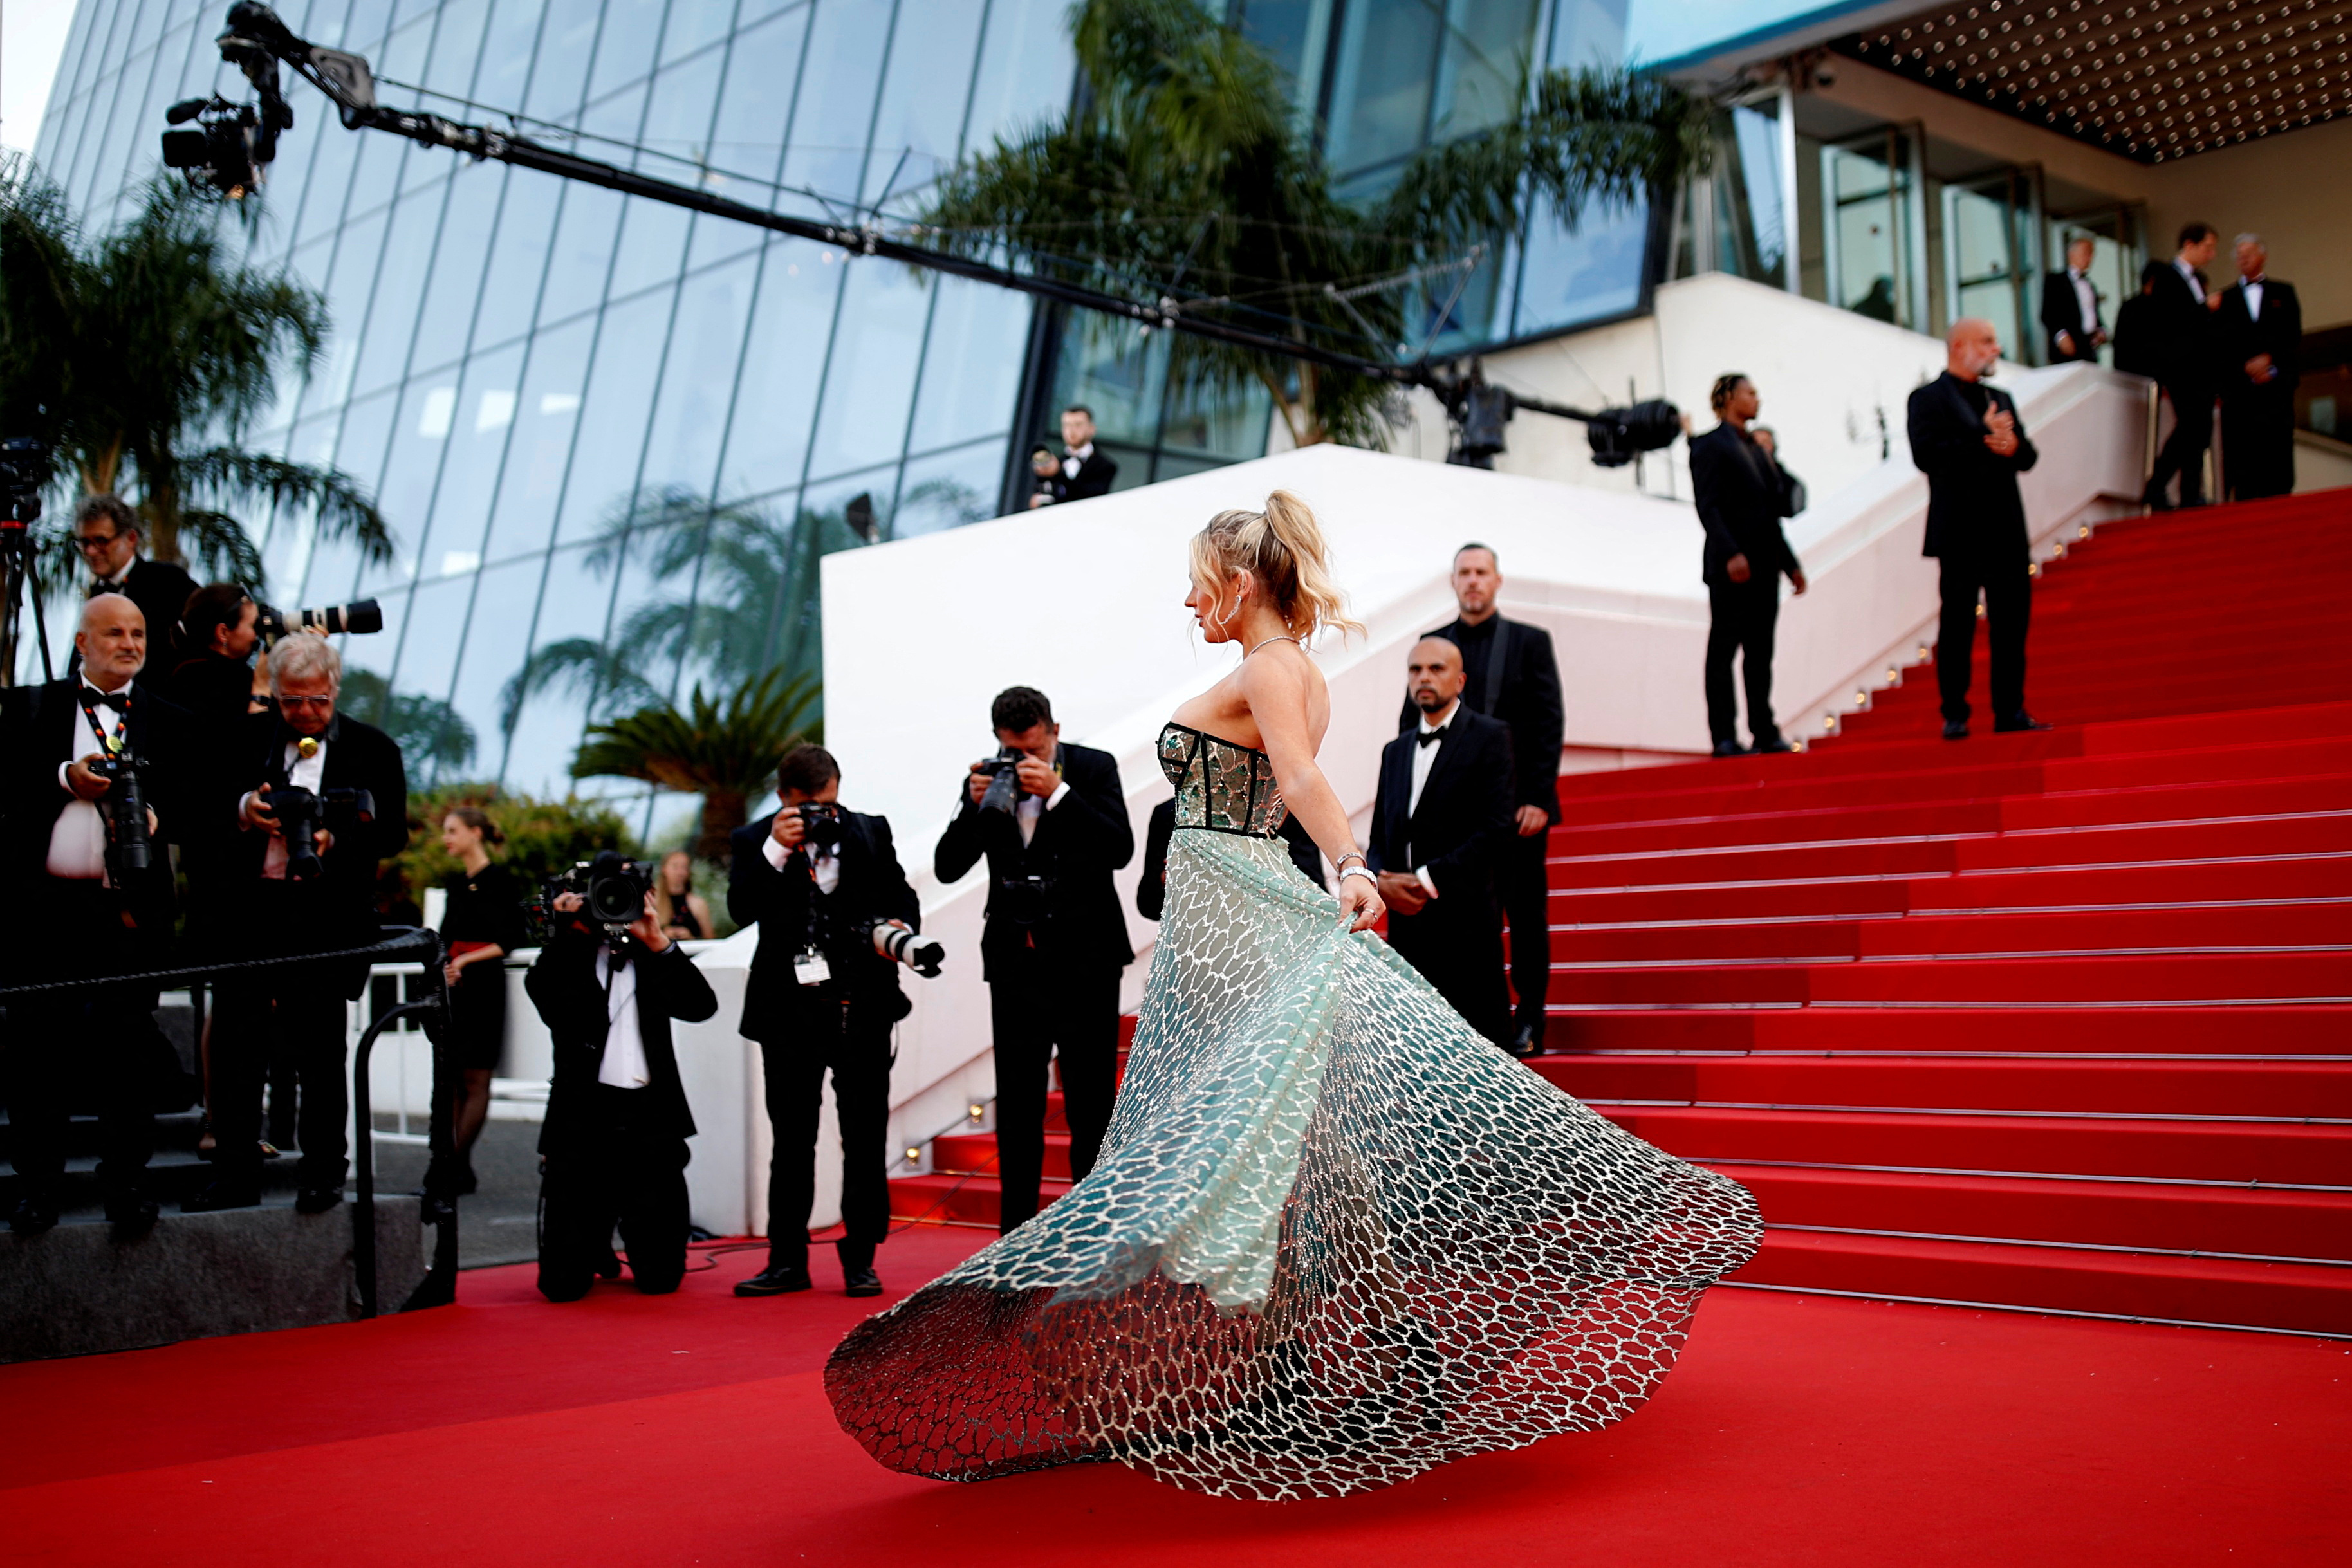 Cannes Film festival 2023: Date, Schedule, Winners and Location